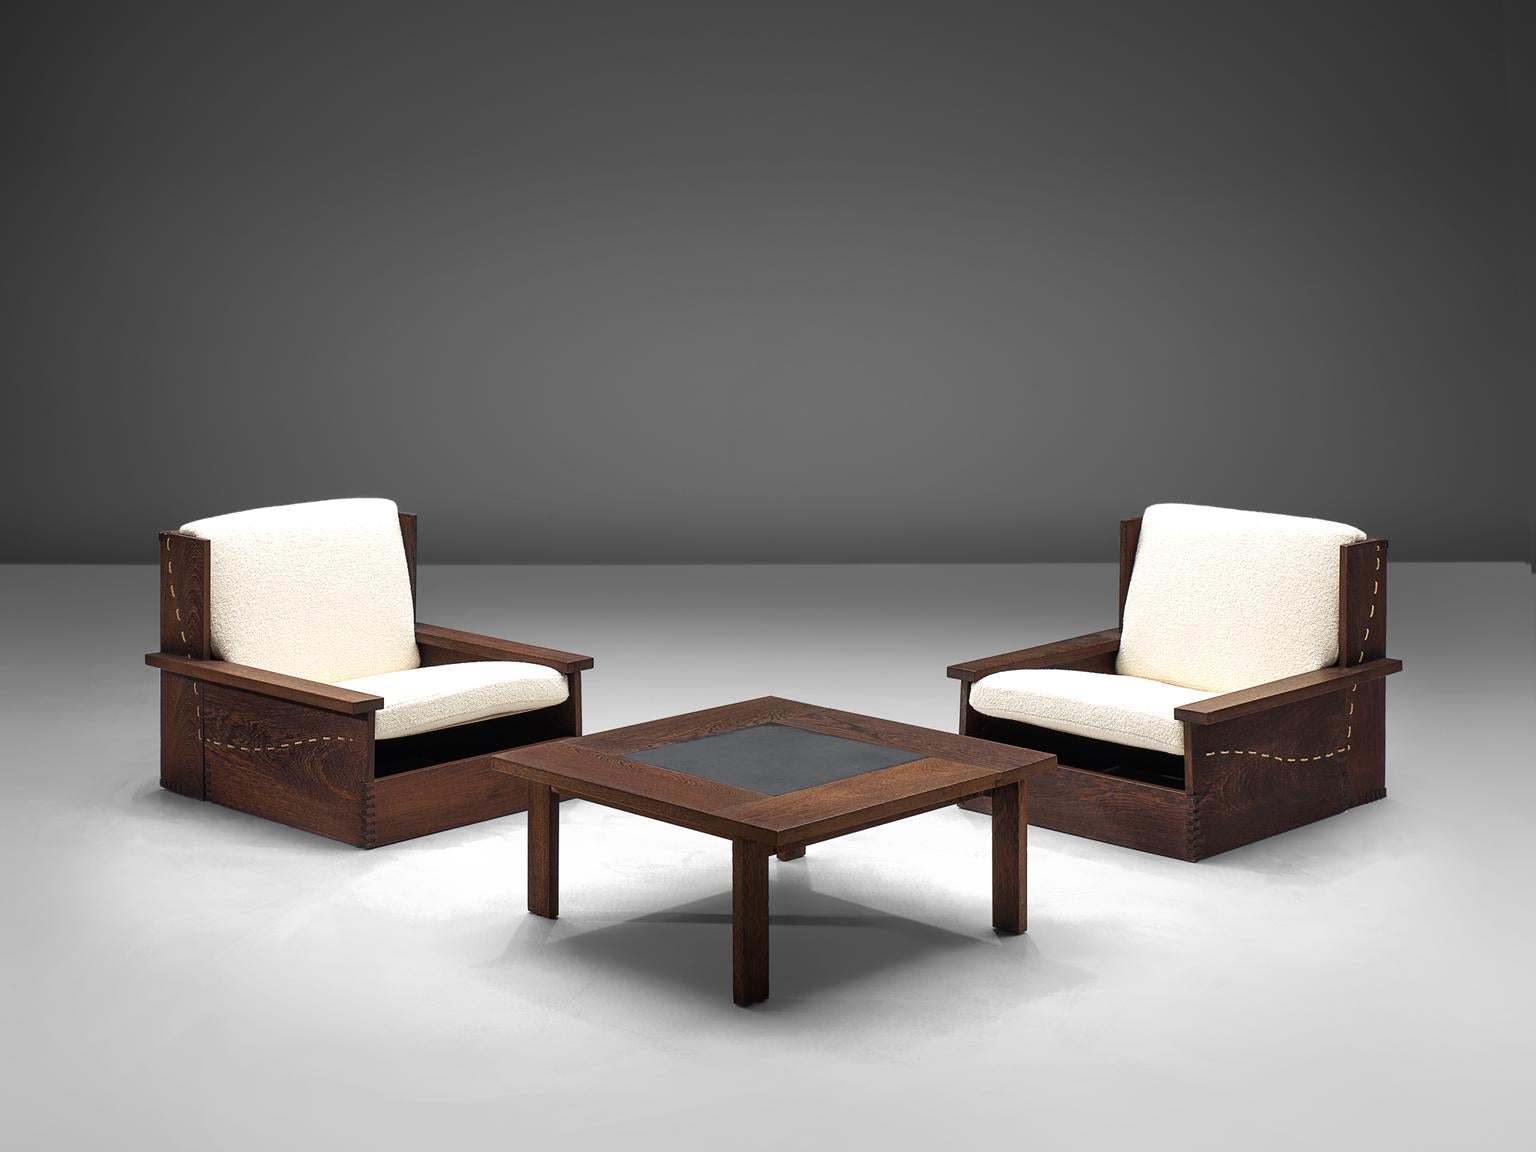 Mid-20th Century Danish Wenge Lounge Chairs and Coffee Table with Pierre Frey Fabric